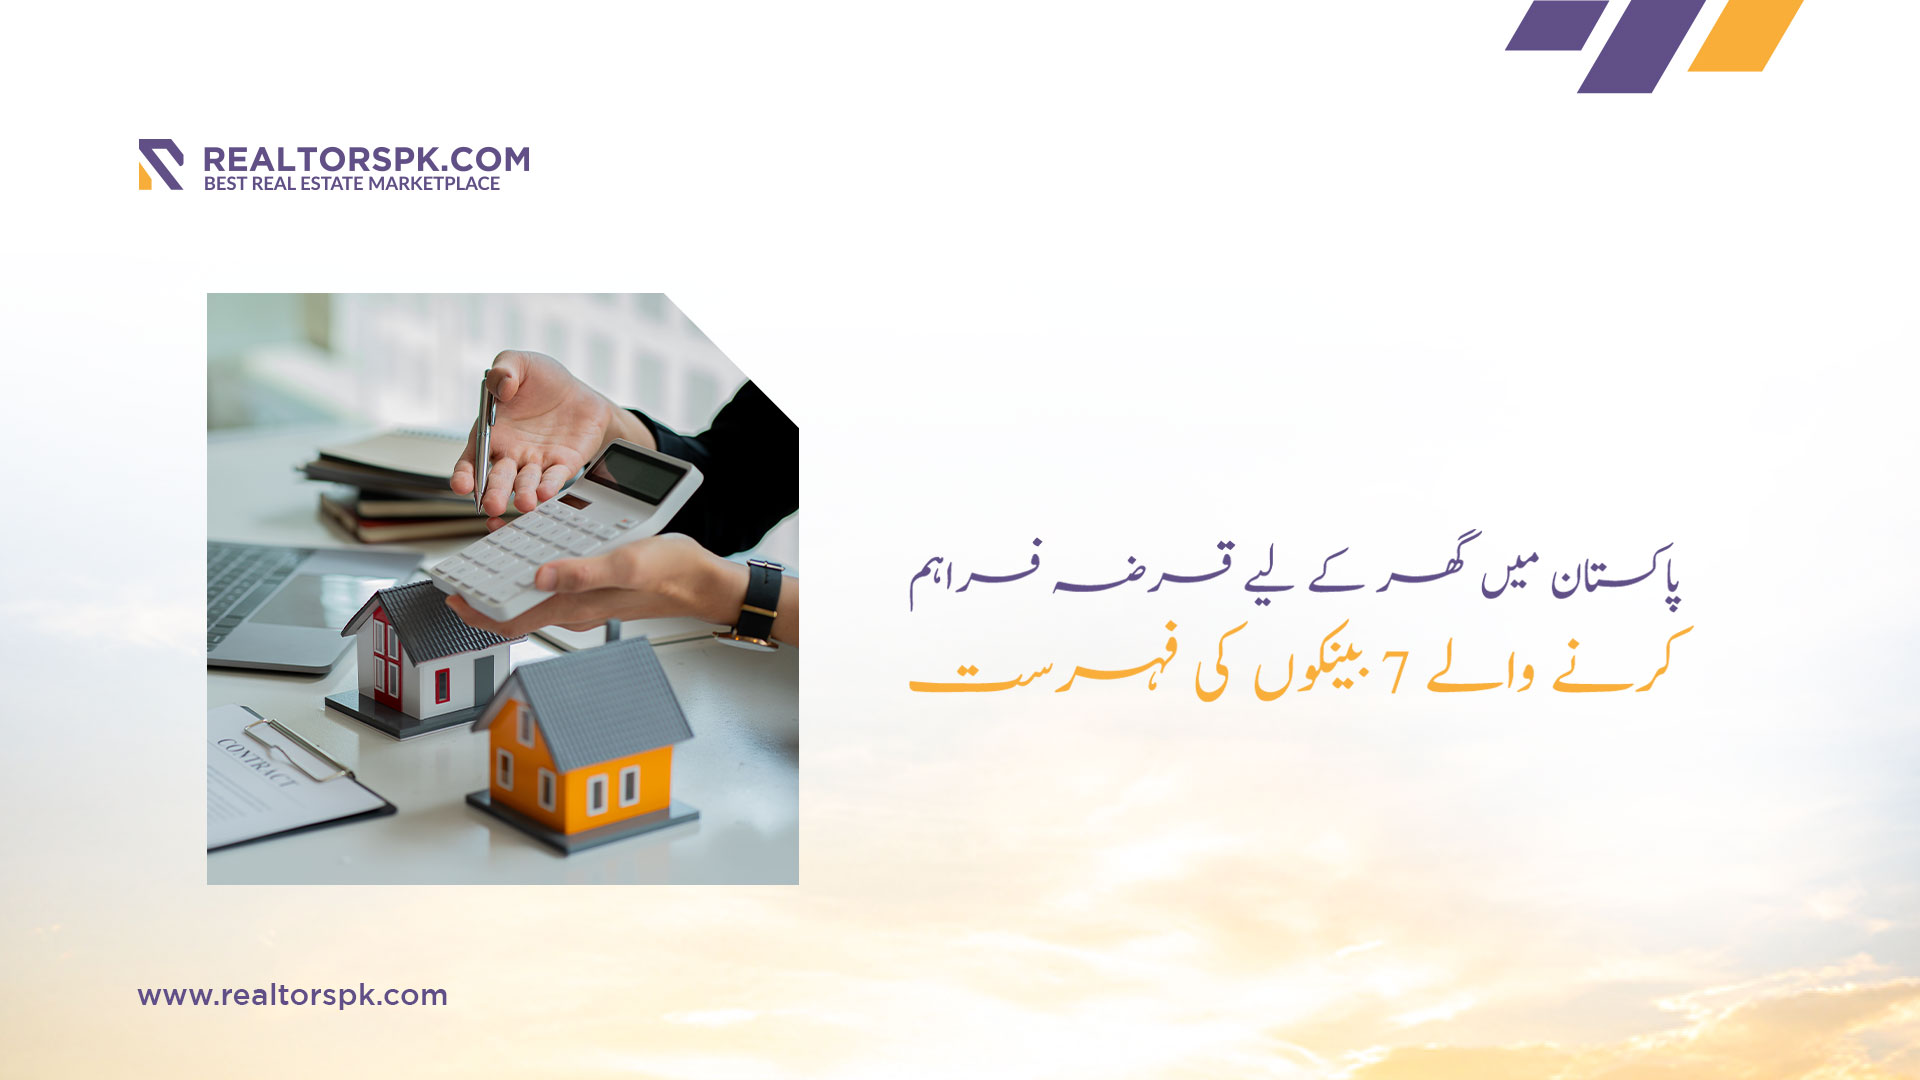 List of 7 Banks Providing Home Loans in Pakistan